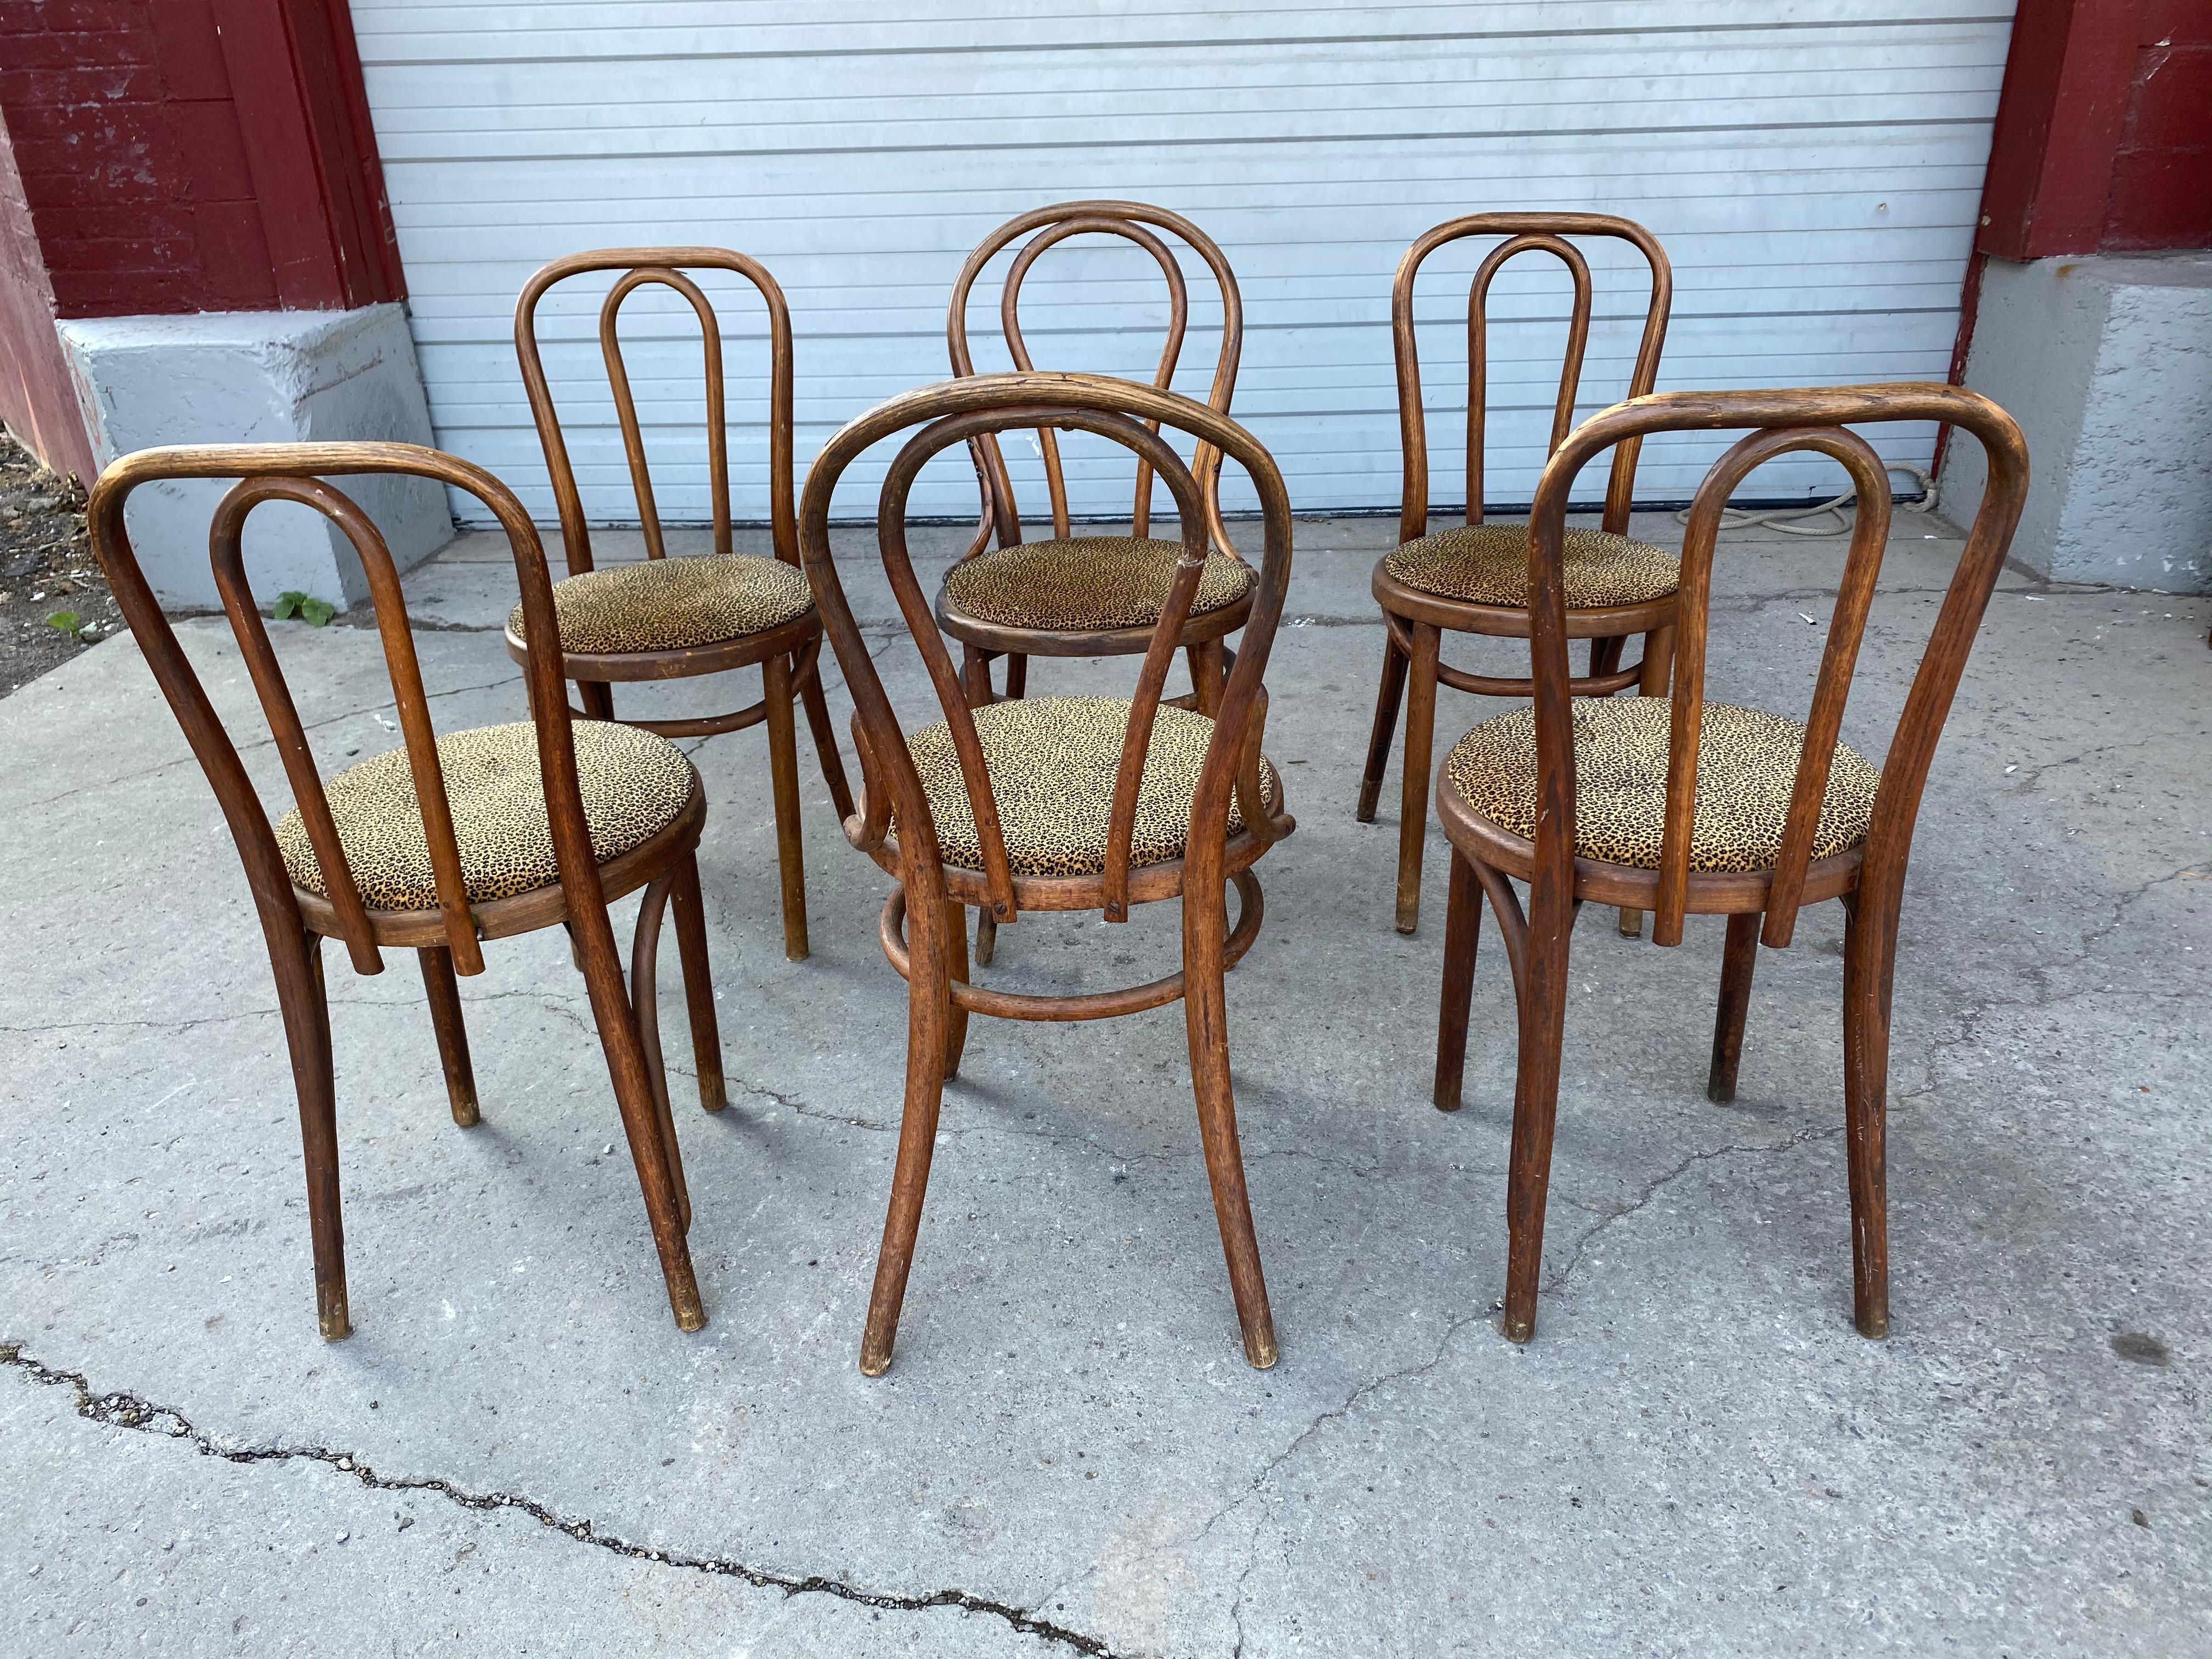 Classic set of 6 bentwood cafe dining chairs attributed to Thonet, recently reupholstered in a leopard print fabric, set consists of 4 matching chairs and two slightly different design (see photo).